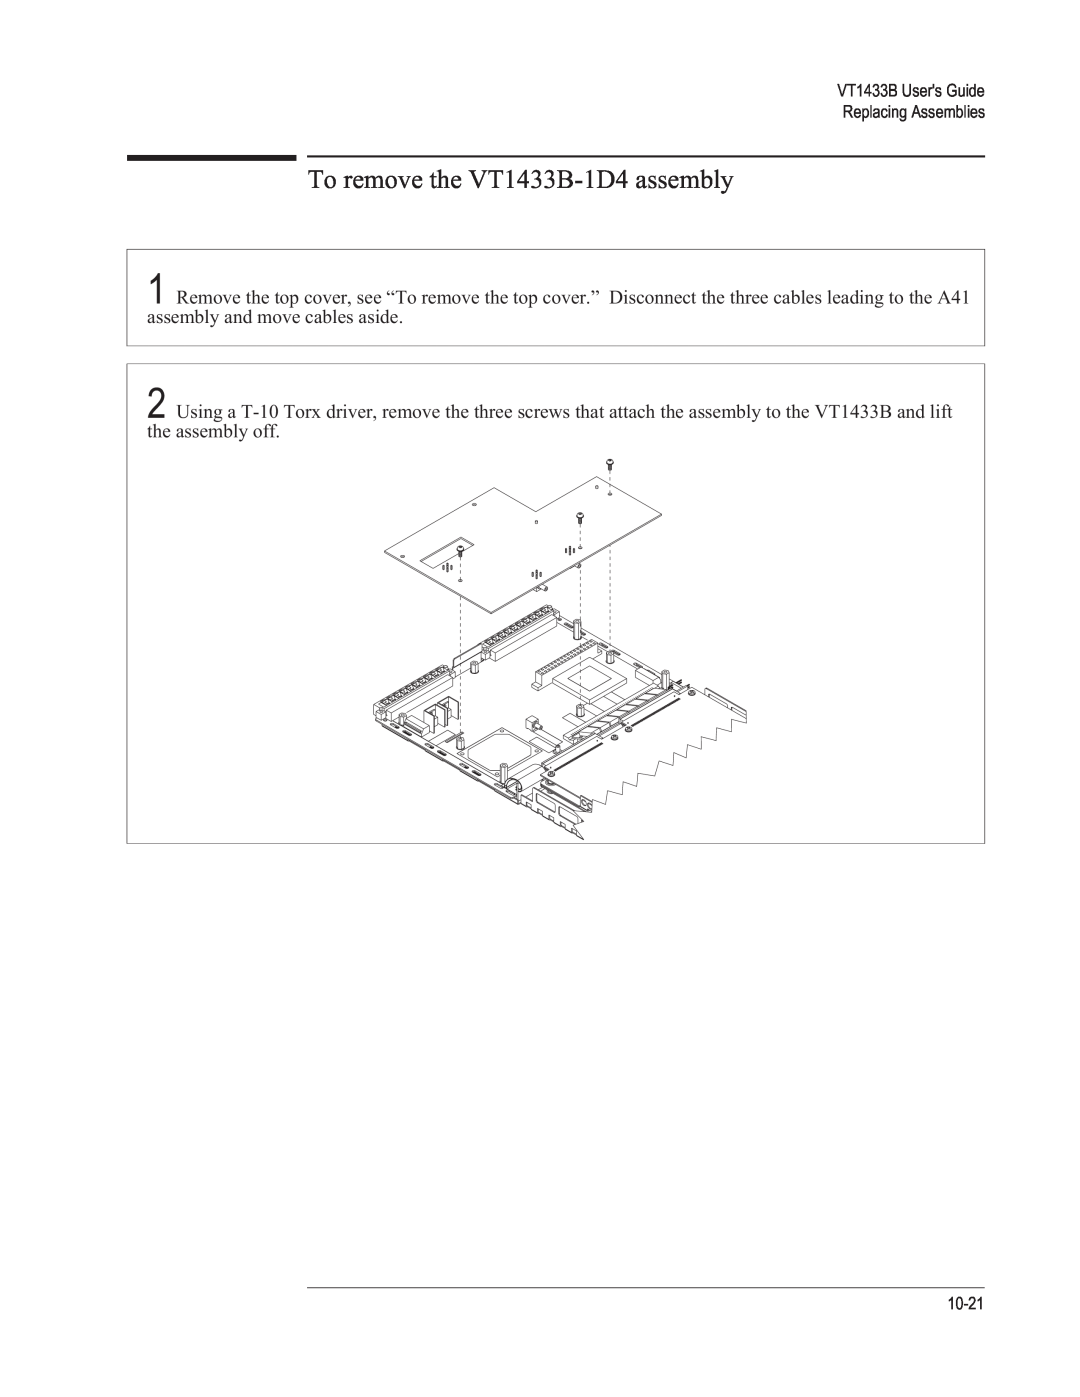 VXI manual To remove the VT1433B-1D4assembly, VT1433B Users Guide Replacing Assemblies, 10-21 